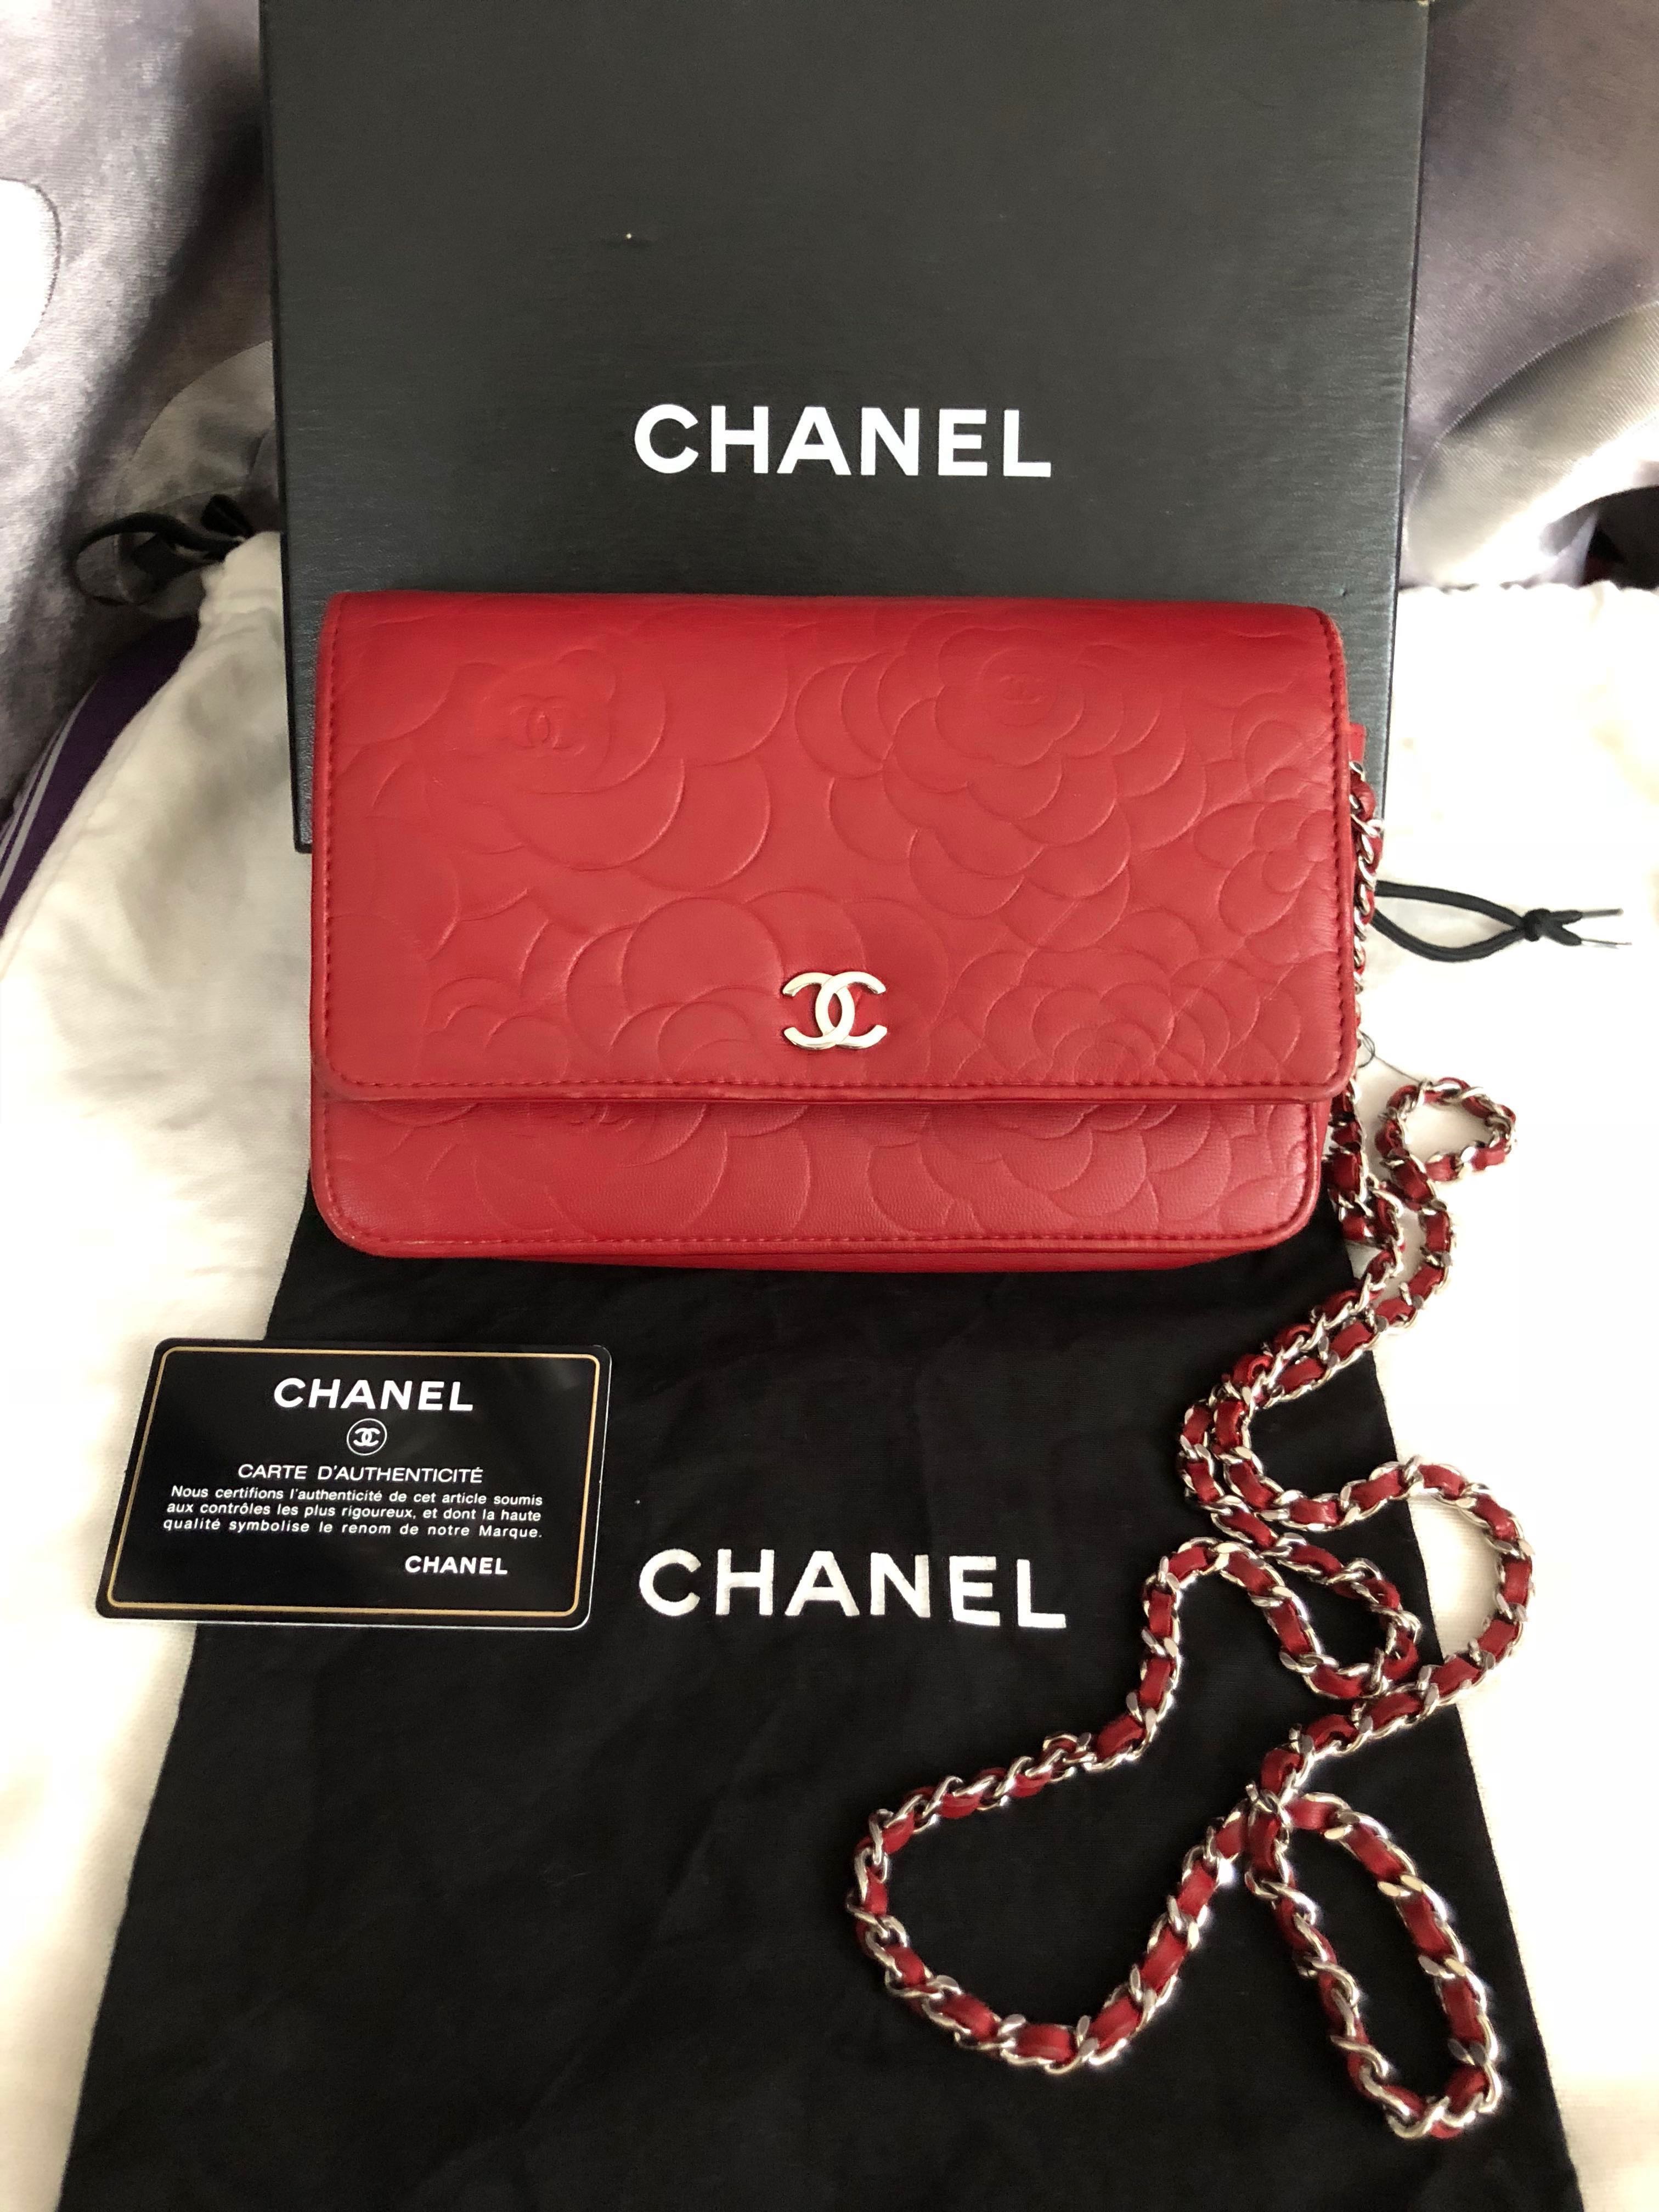 Opruiming > Chanel Woc Red -” style=”width:100%” title=”opruiming > chanel woc red -“><figcaption>Opruiming > Chanel Woc Red –</figcaption></figure>
<figure><img decoding=